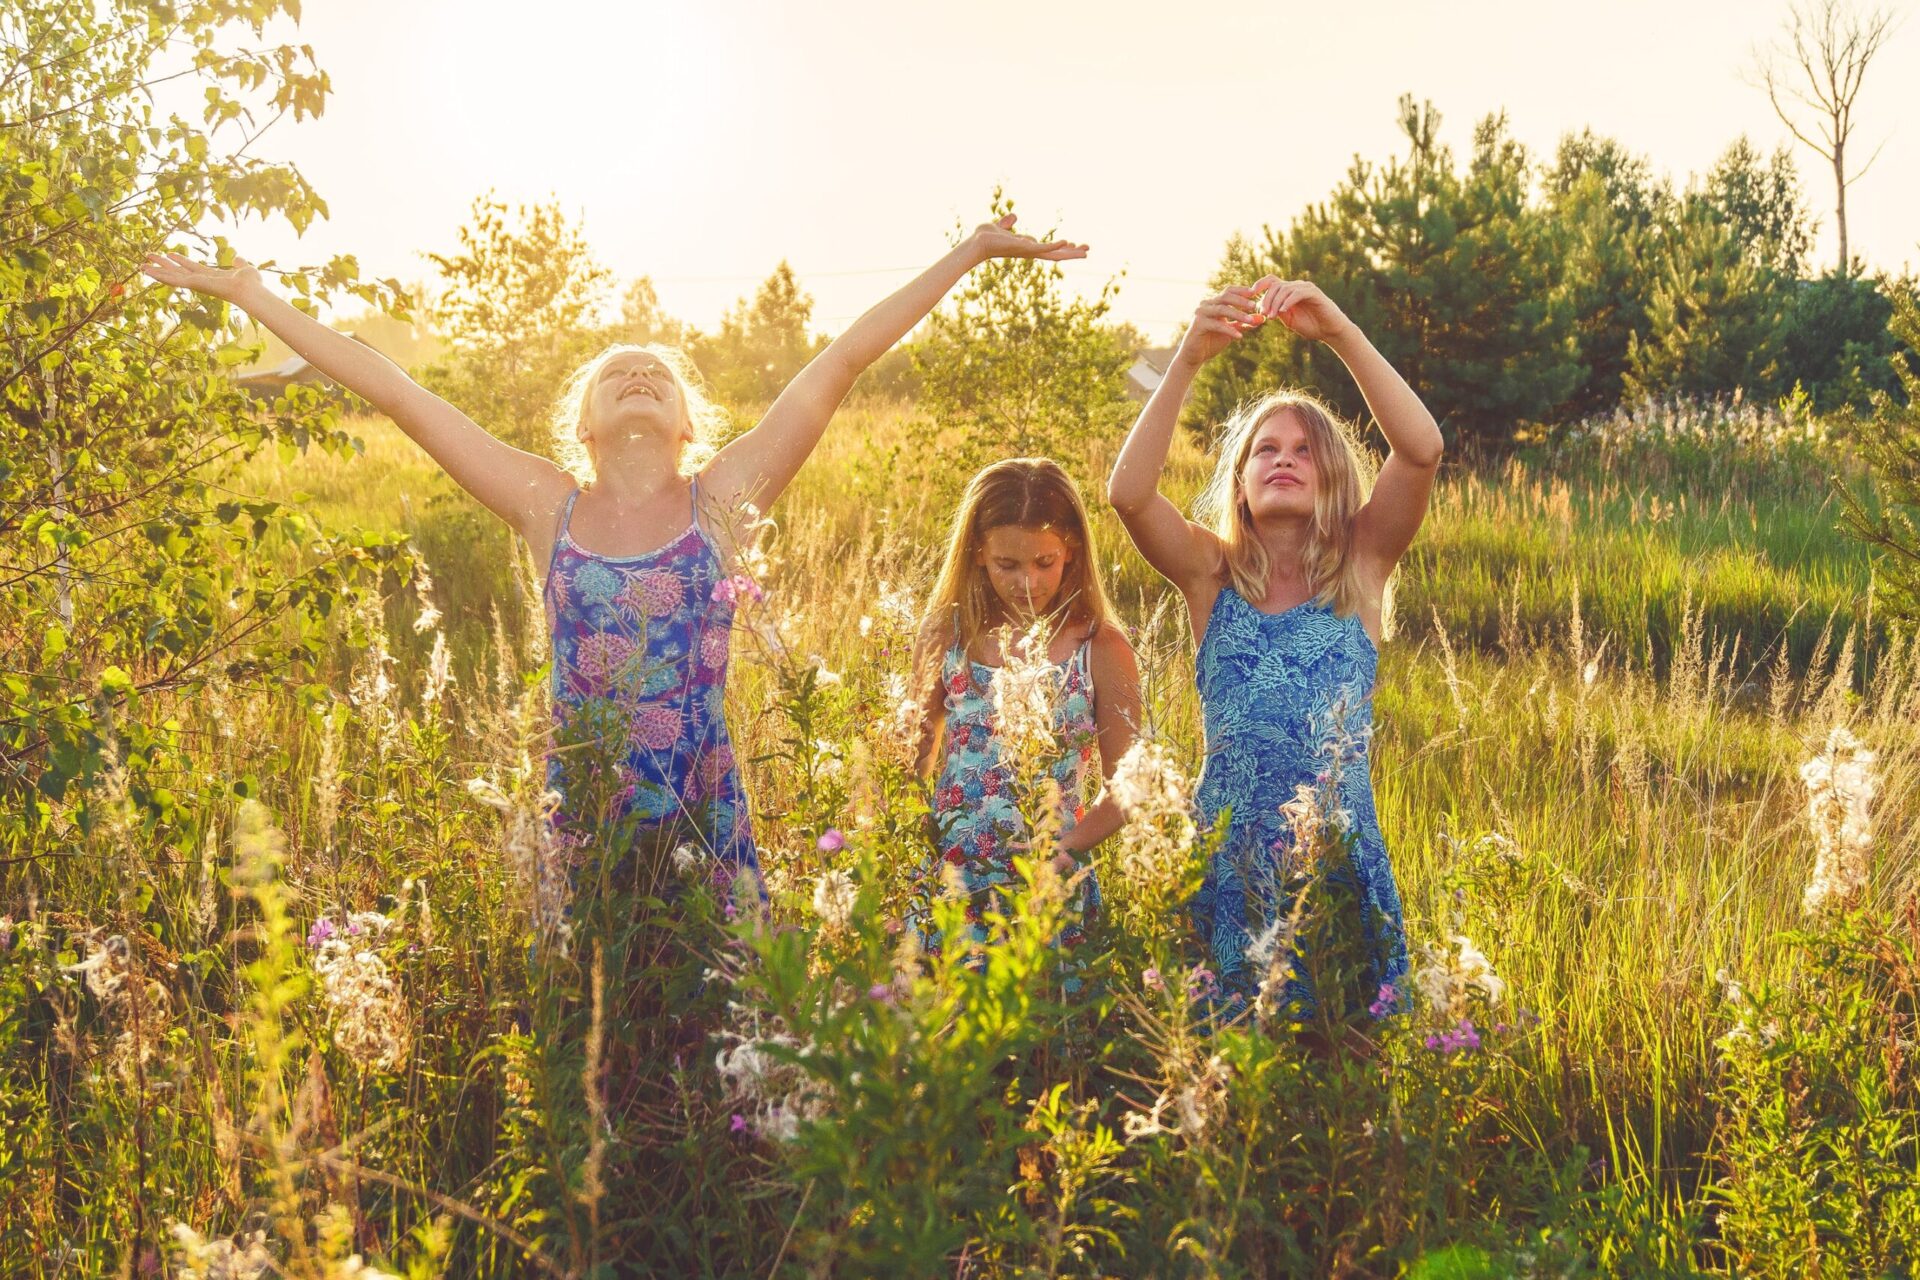 Girls in field raising arms up to the sky with flowers